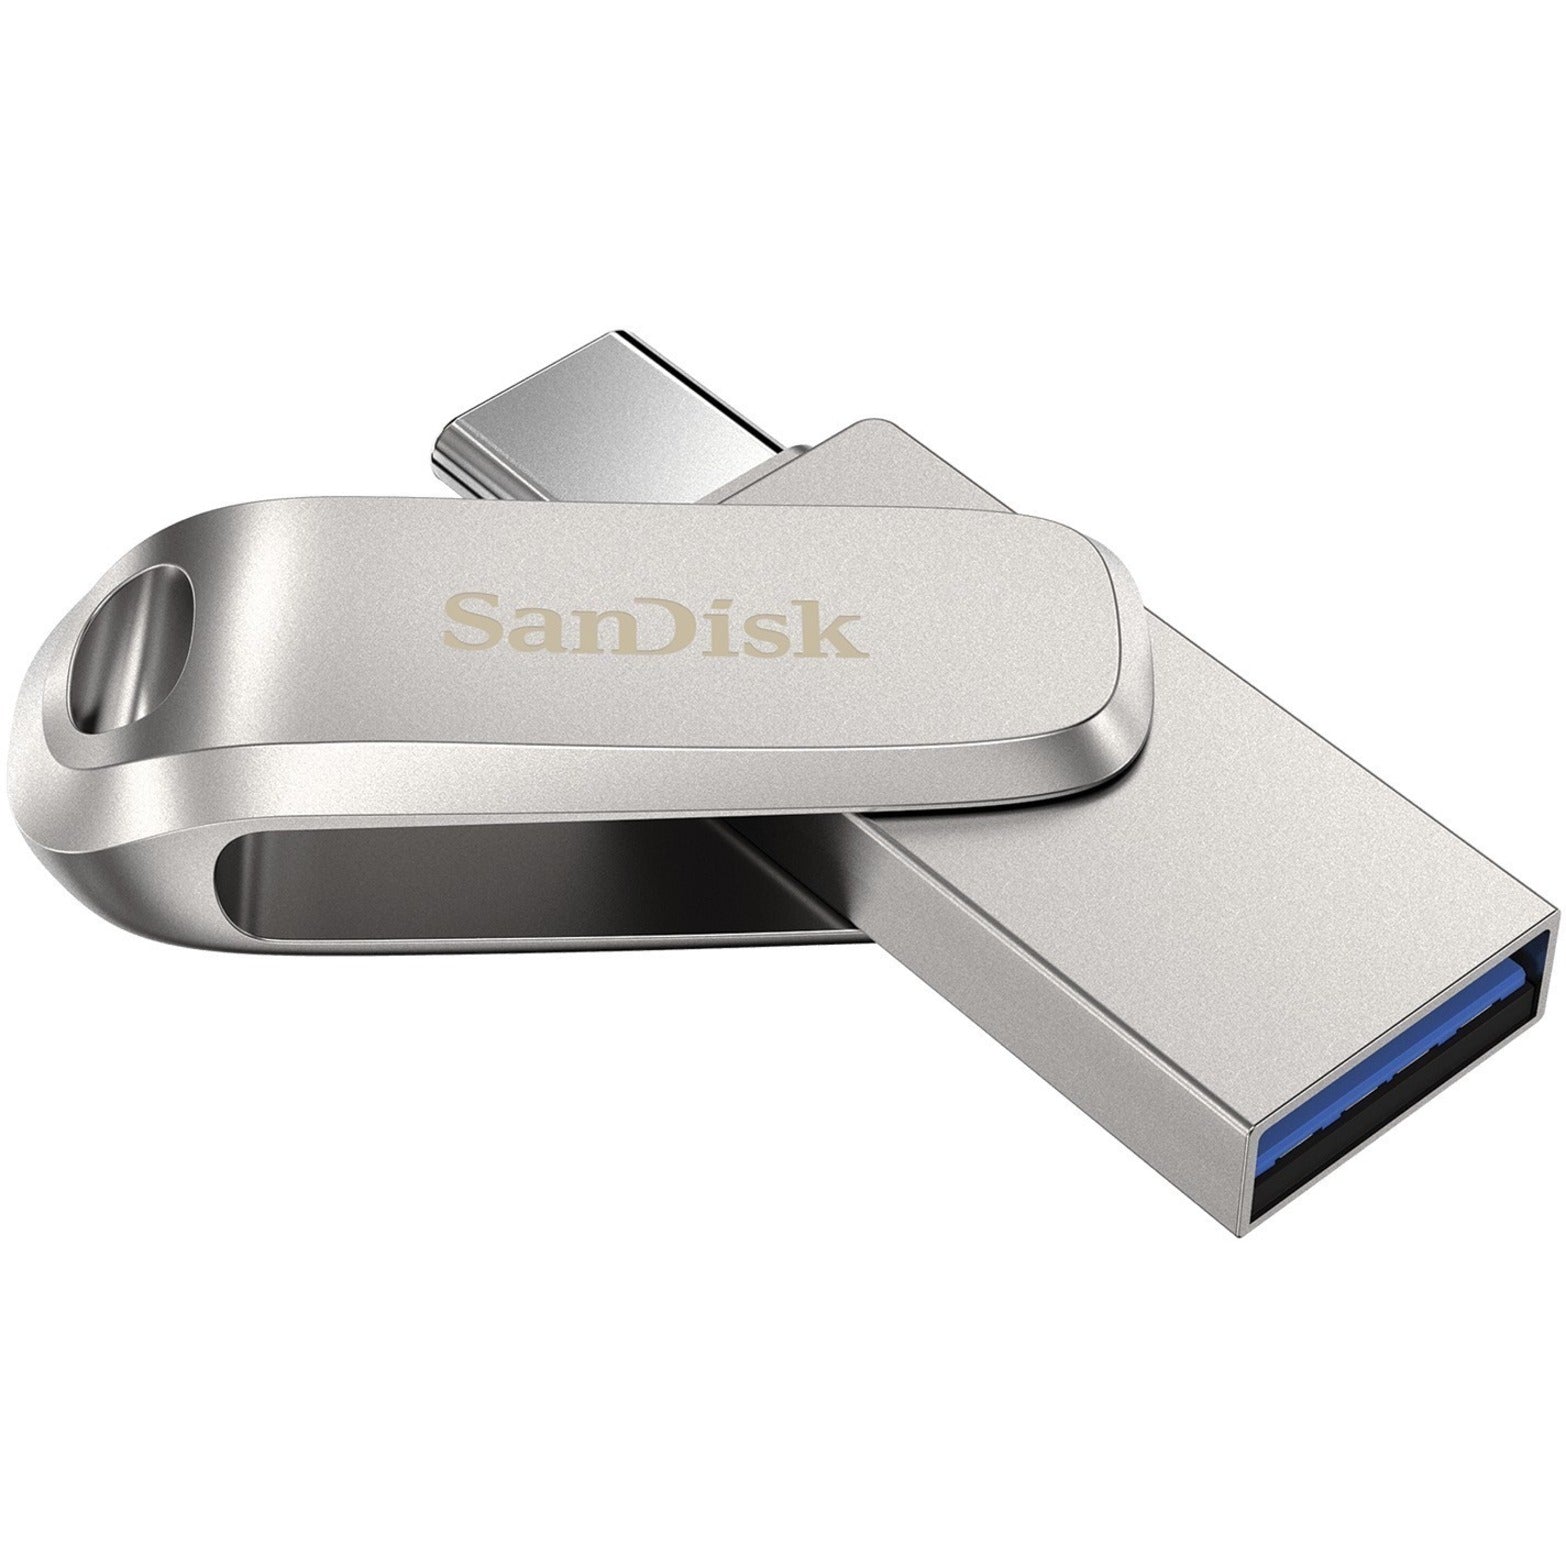 SanDisk SDDDC4-128G-A46 Ultra Dual Drive Luxe USB Type-C - 128GB, High-Speed Data Transfer and Storage